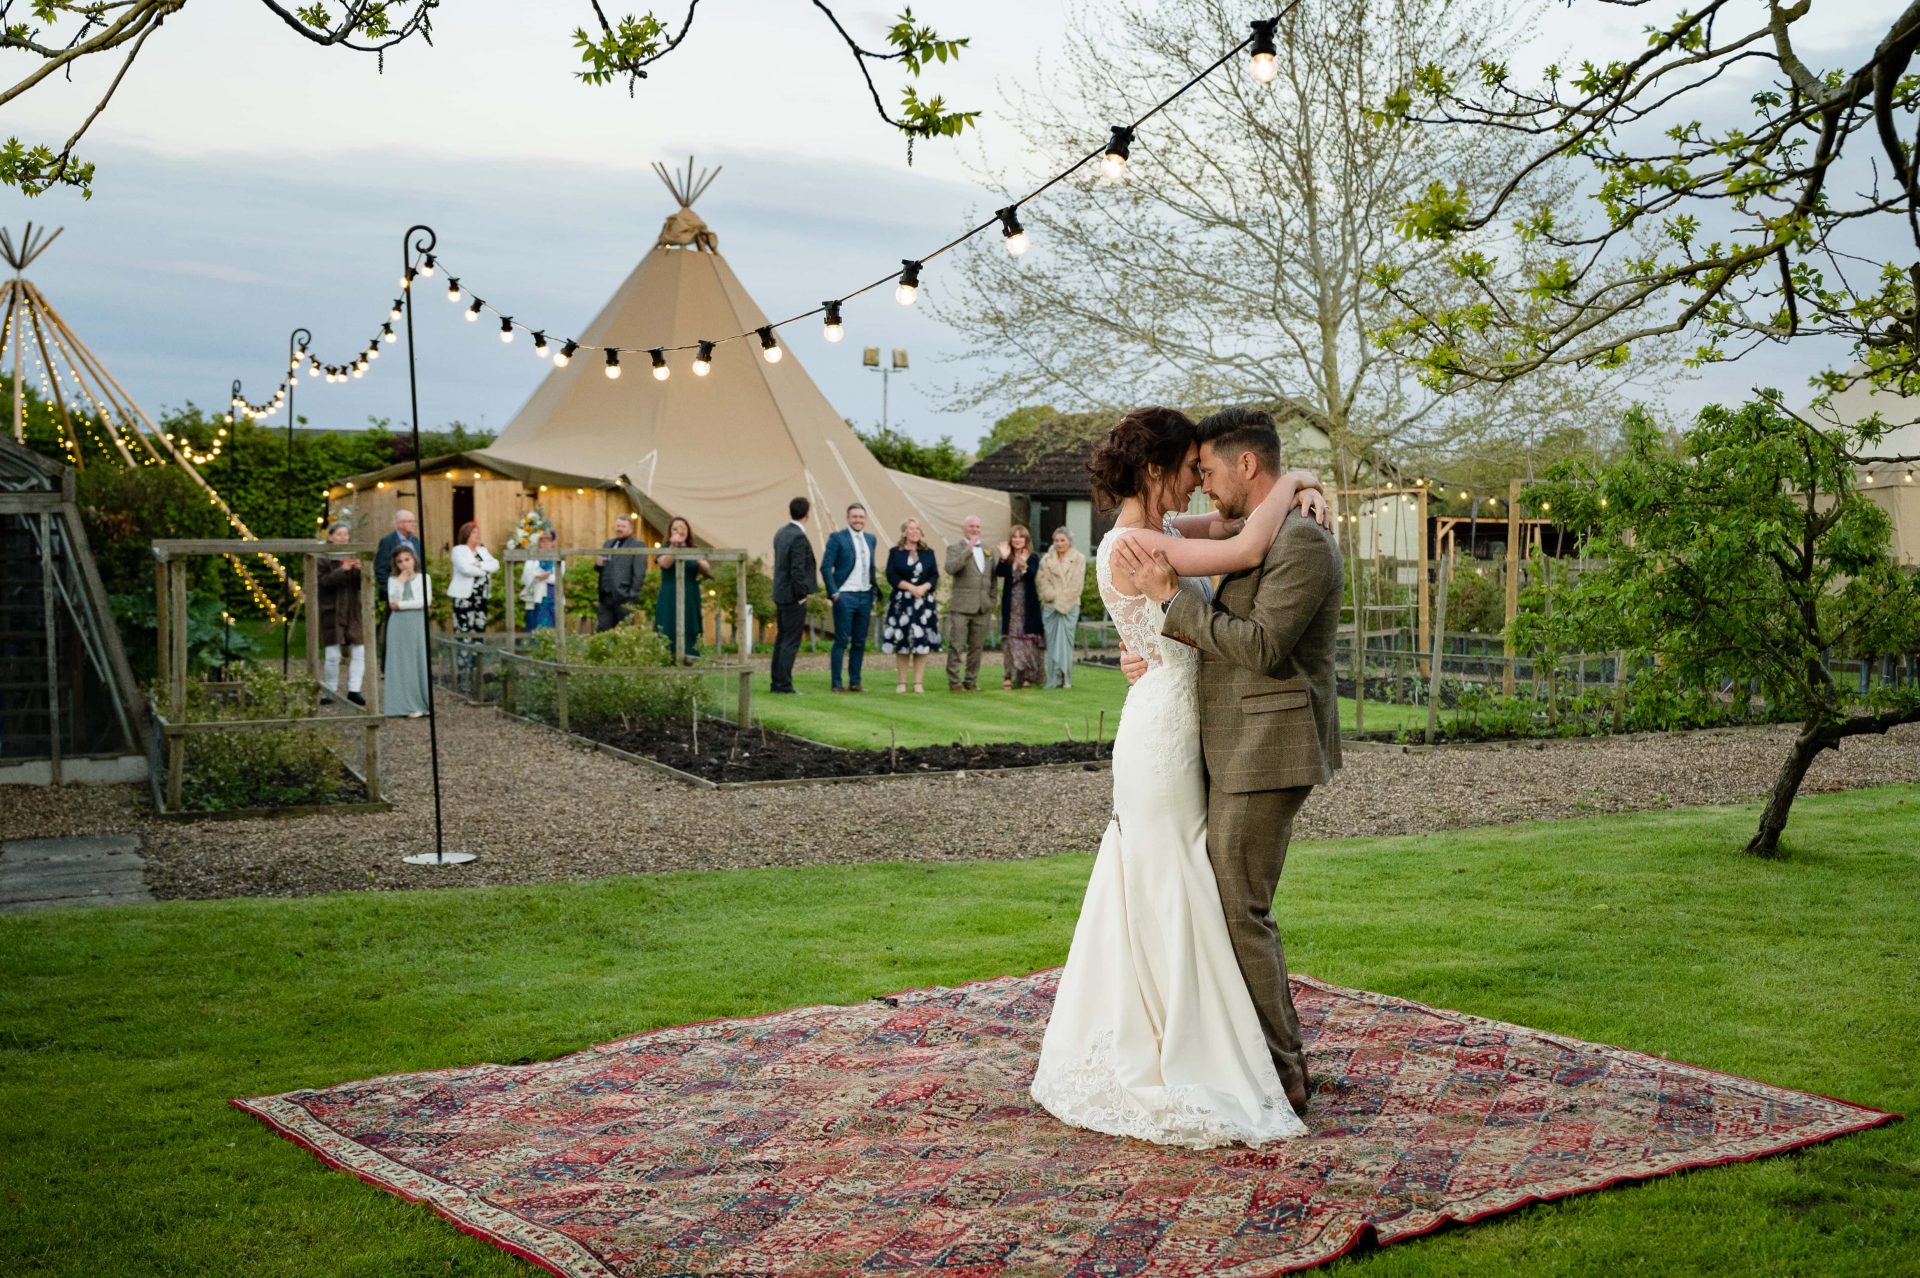 Outdoor first dance on a persian rug at Hill Farm House in Brigstock